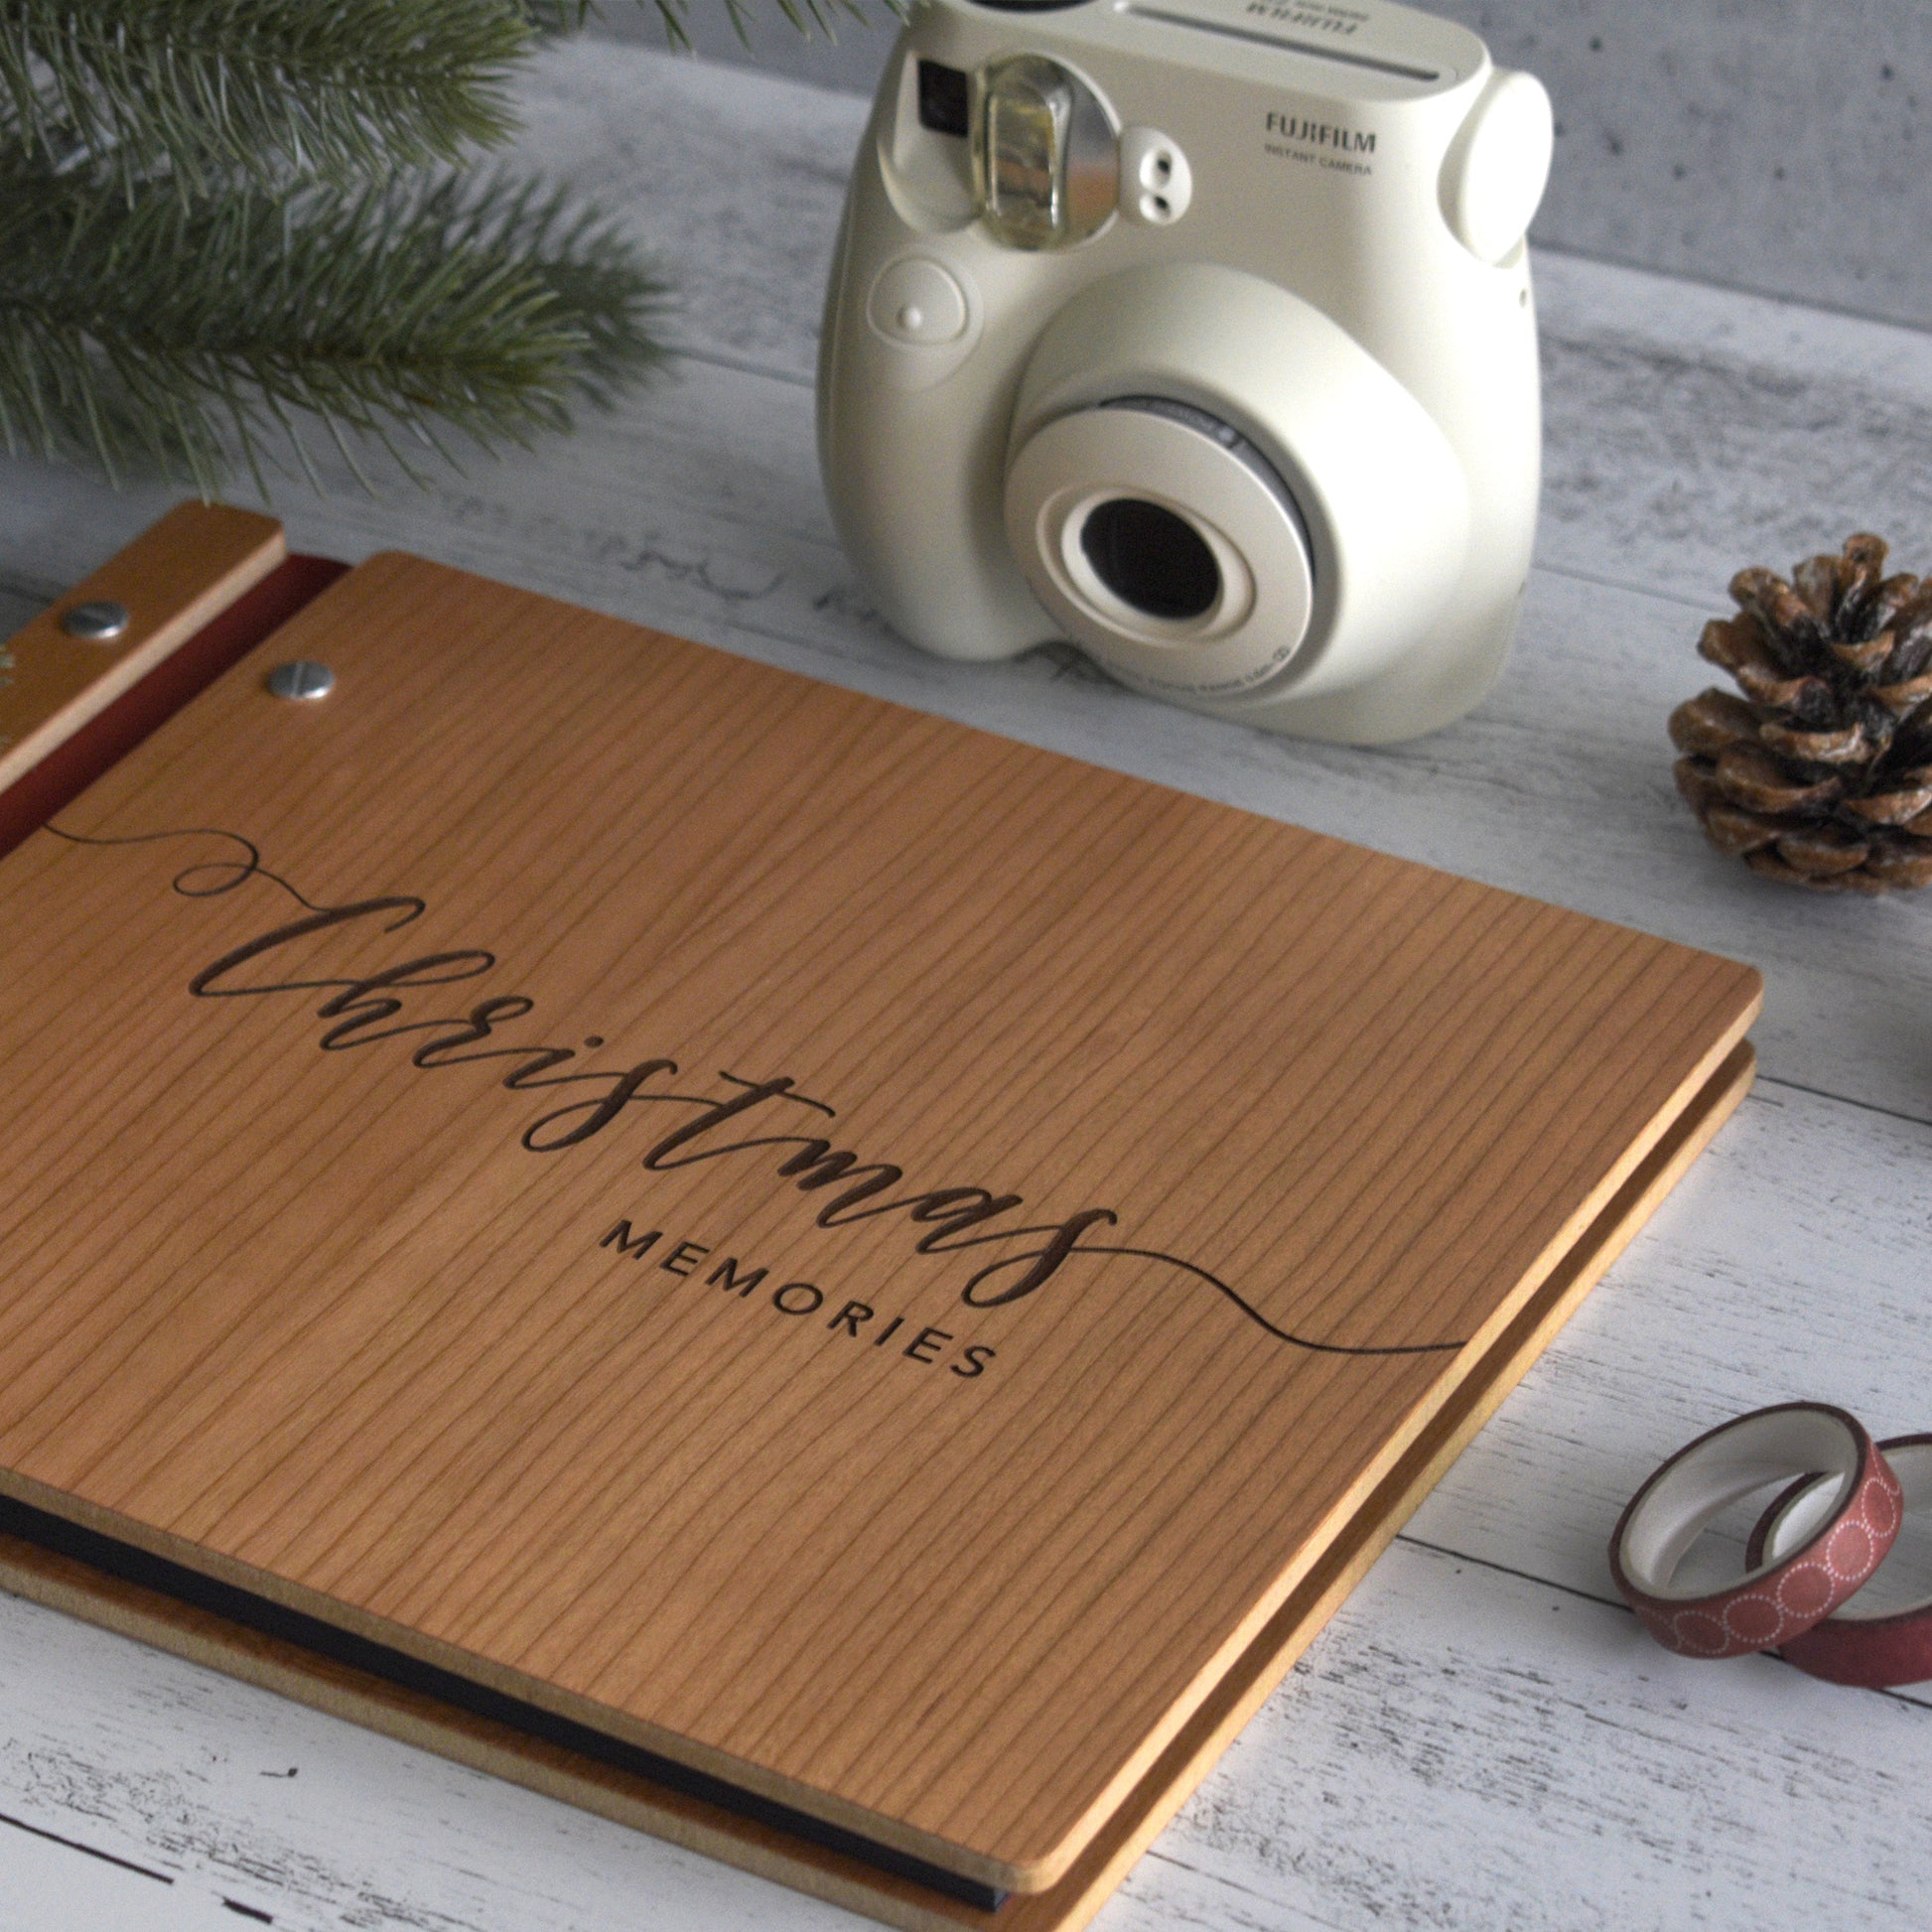 An 8.5x11" guest book lies on a table. Made of cherry wood, burgundy vegan leather binding, and silver hardware. The front cover reads Christmas Memories.